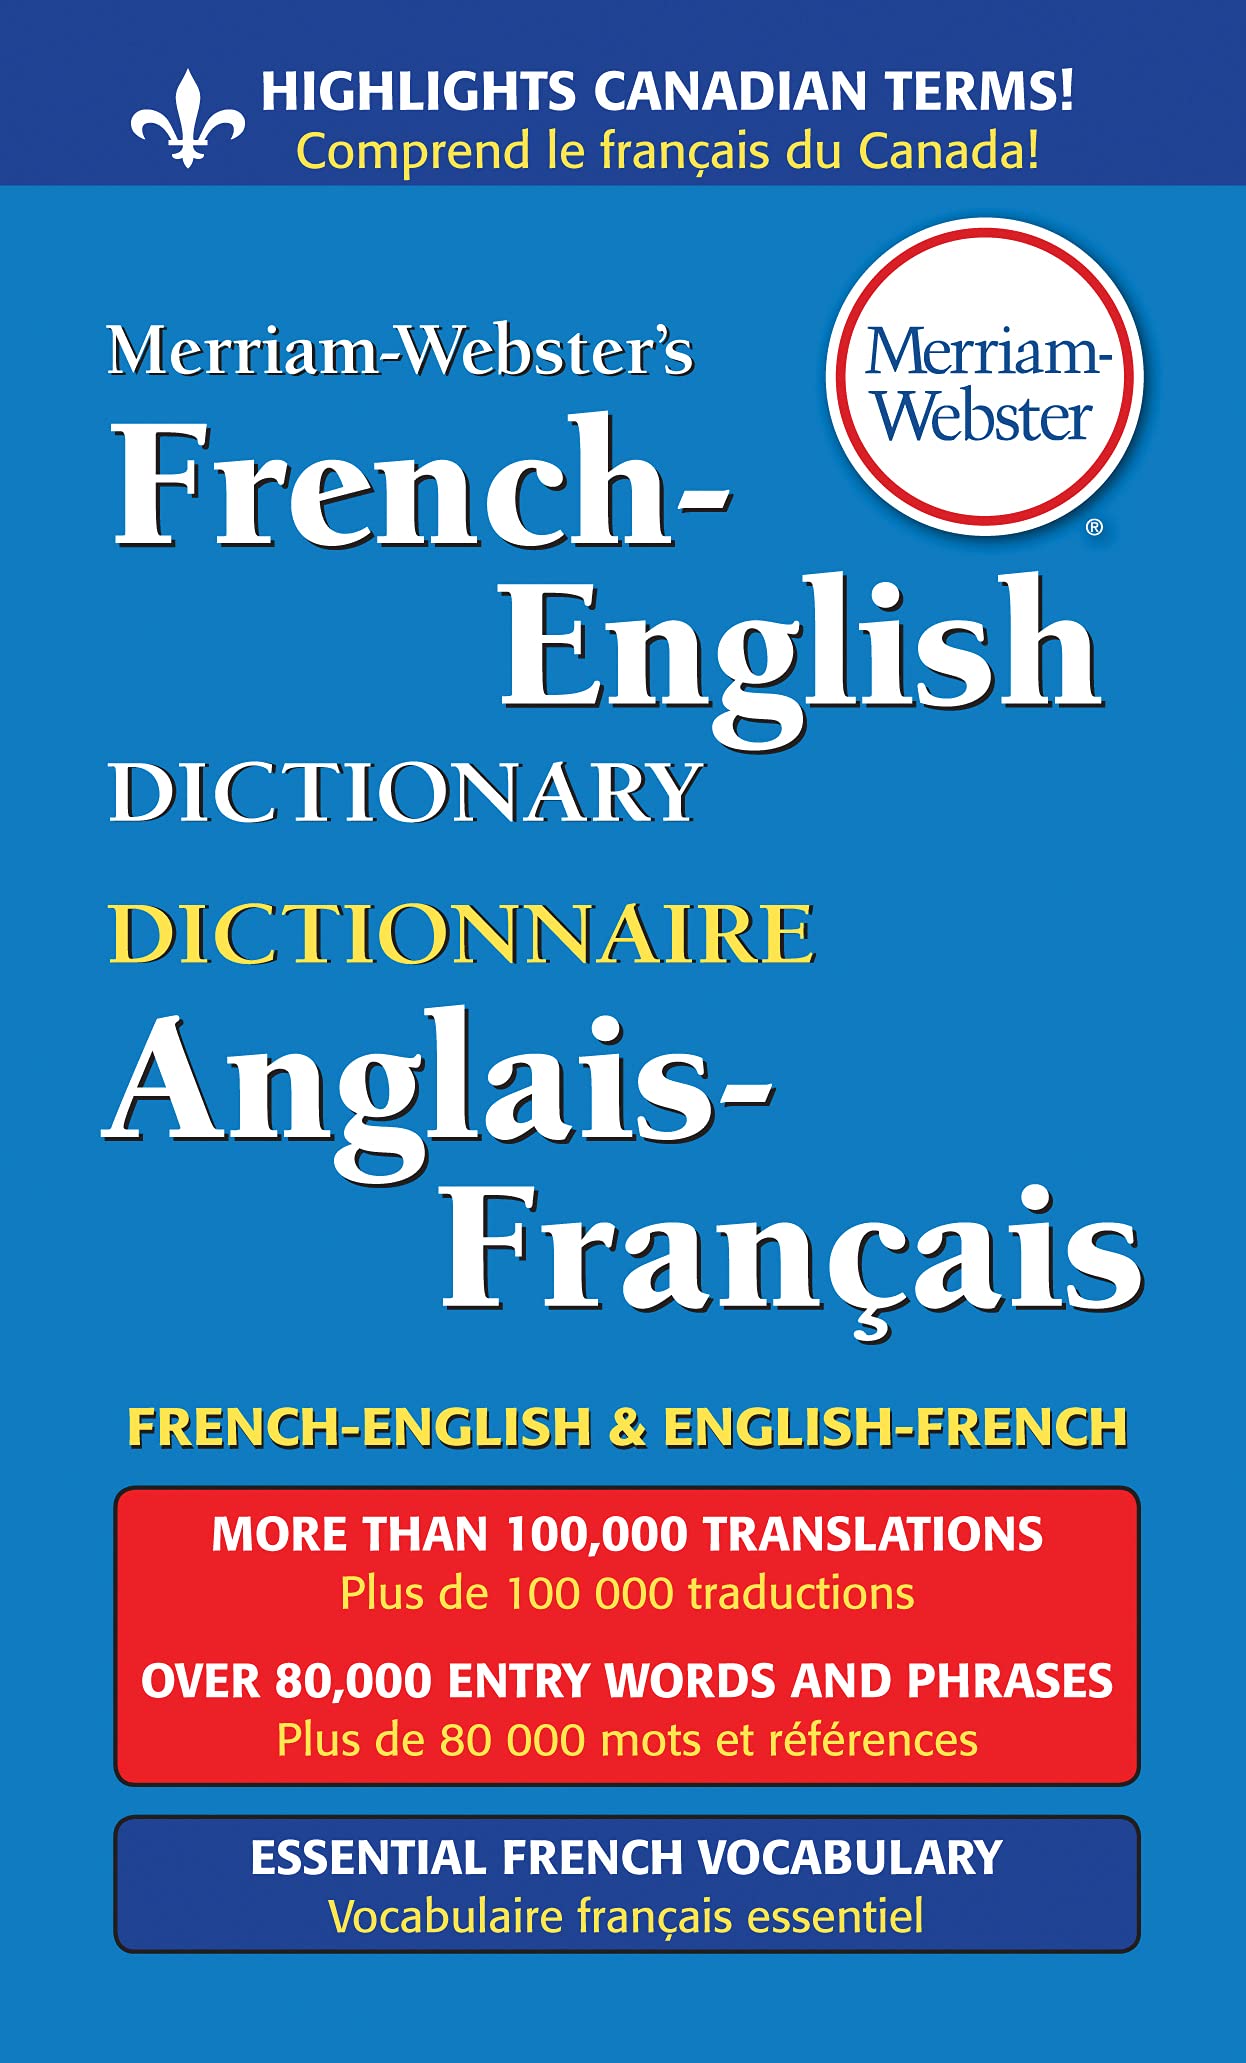 Merriam-Webster's French-English Dictionary - SureShot Books Publishing LLC